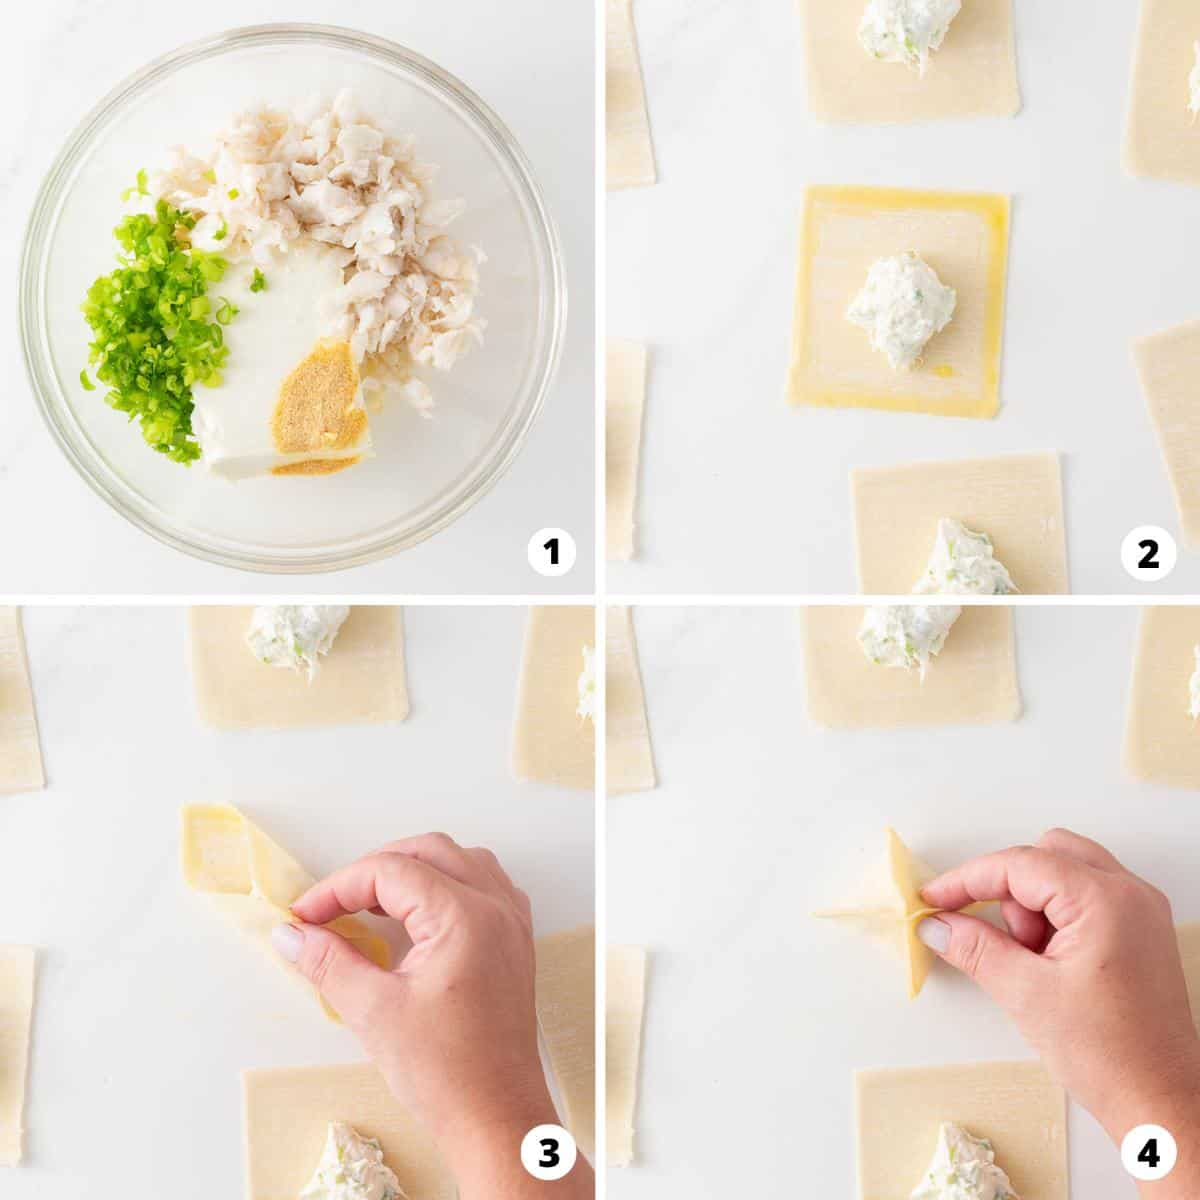 Showing how to make crab rangoon in a 4 step collage.